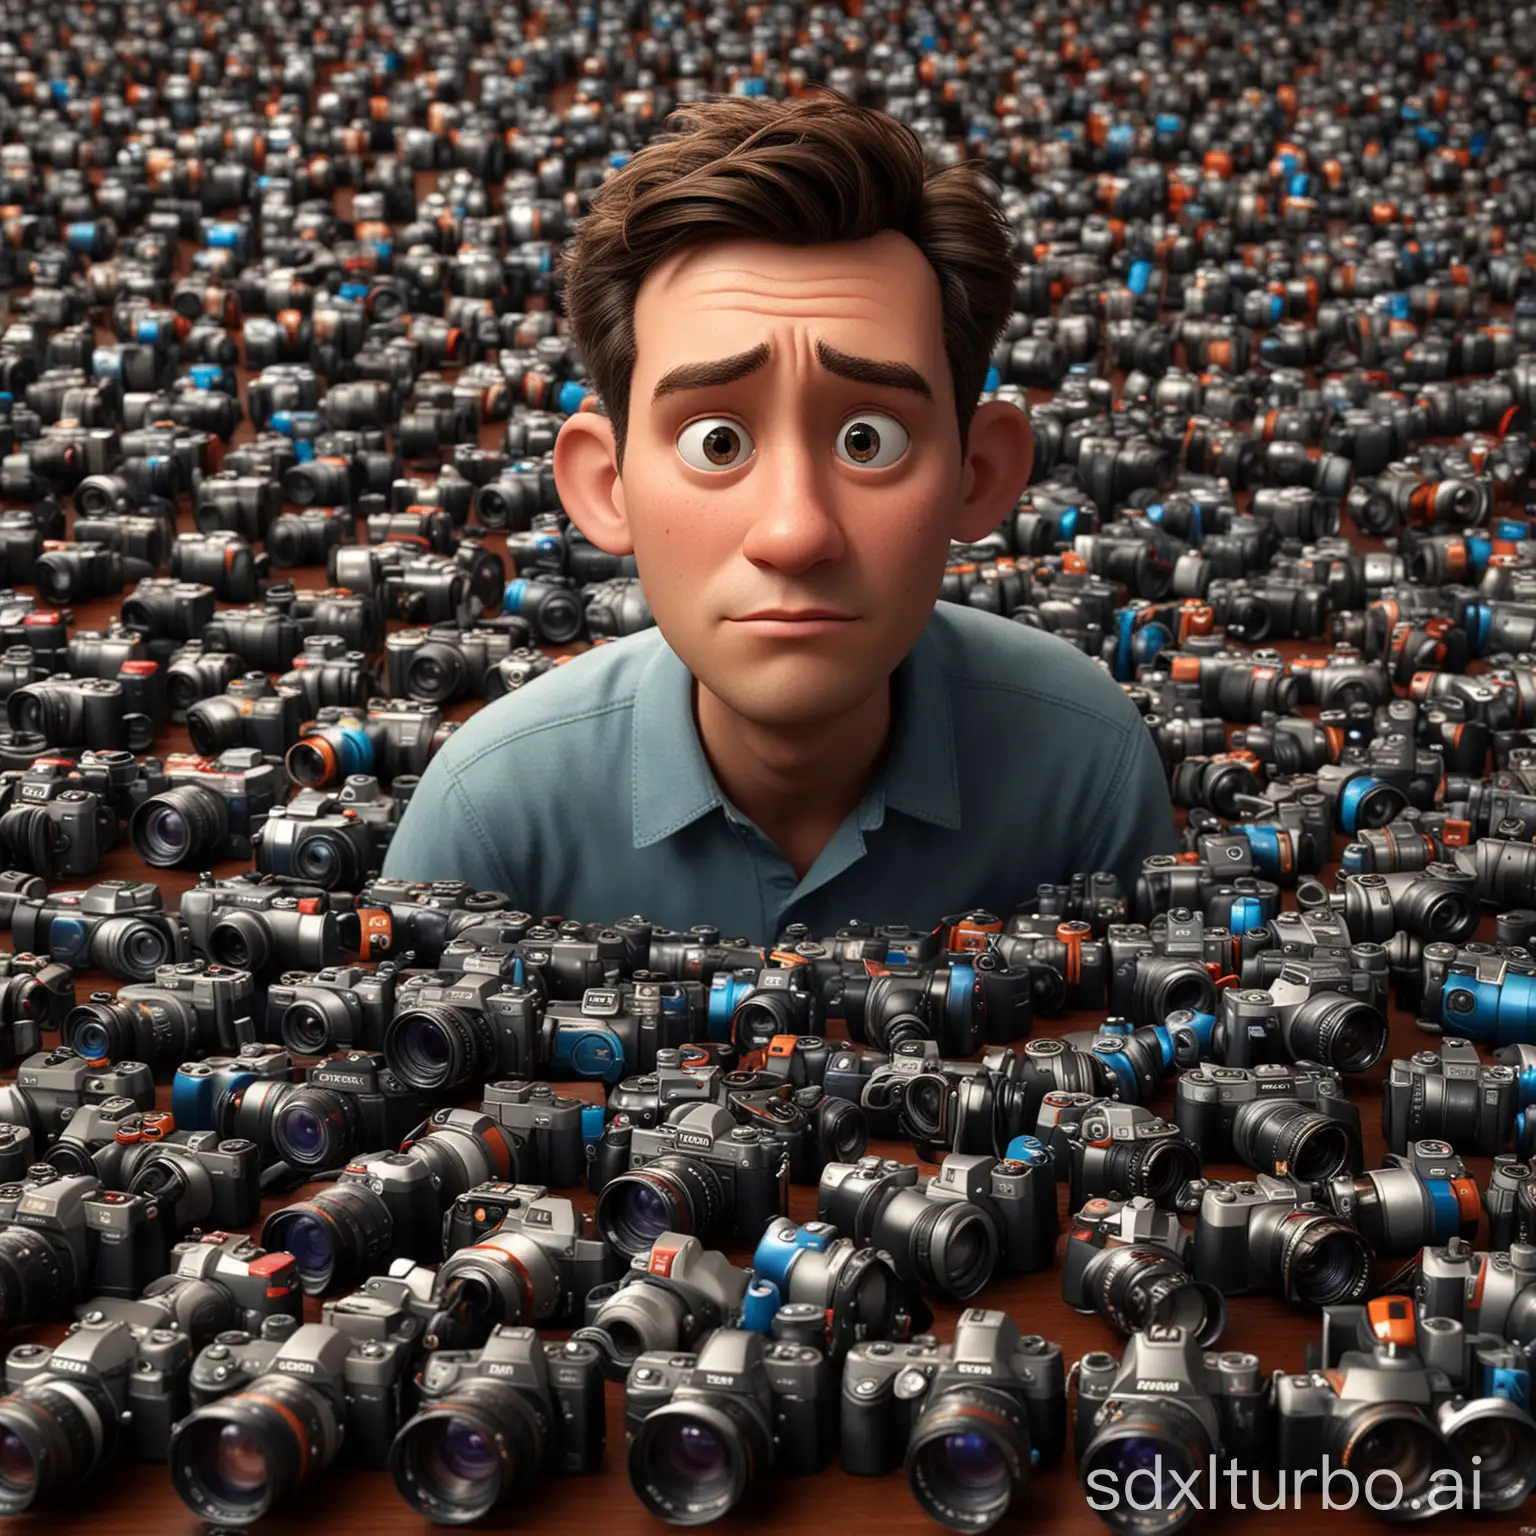 Disney Pixar movie poster, a male photographer, is thinking very seriously filled with cameras around him to decide which camera he will buy next, cinematic background, realistic 3D